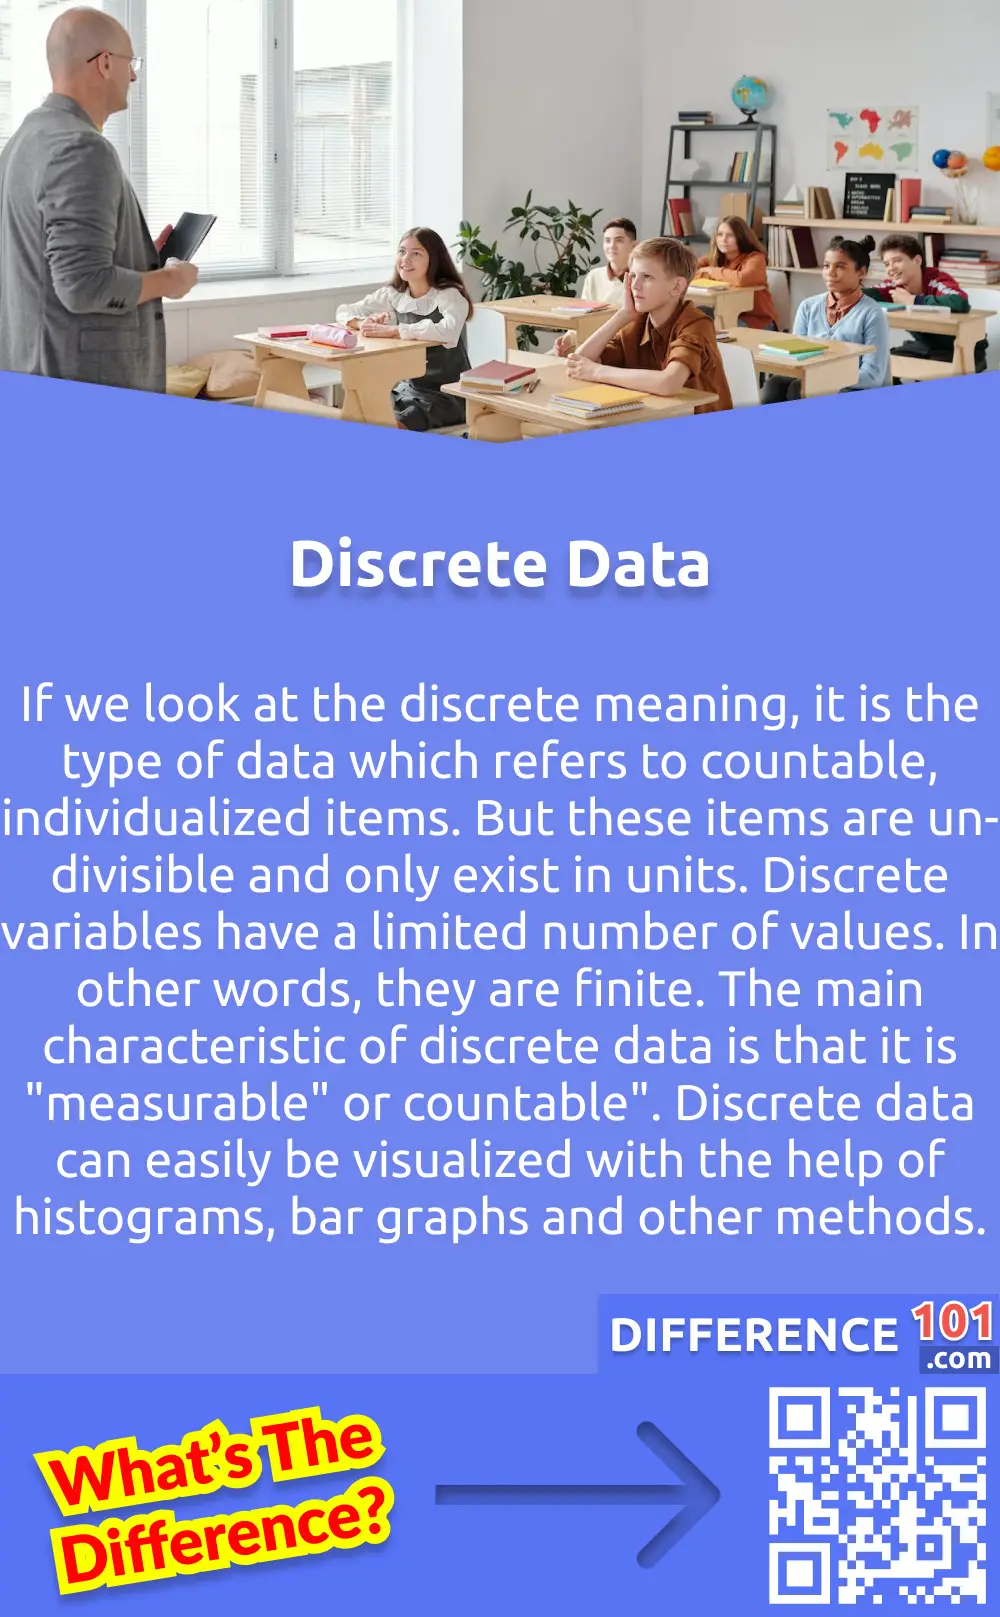 What Is Discrete Data? If we look at the discrete meaning, it is the type of data which refers to countable, individualized items. But these items are un-divisible and only exist in units. Discrete variables have a limited number of values. In other words, they are finite. The main characteristic of discrete data is that it is "measurable" or countable". Discrete data can easily be visualized with the help of histograms, bar graphs and other methods. Discrete data contains a wide range of other data types as well. For example, it handles qualitative data and ordinal data. Moreover, discrete data, for example, the letter grading system, does not have to be in number all the time. Discrete data also have limited granularity, and the users can only divide it into the smallest units.
